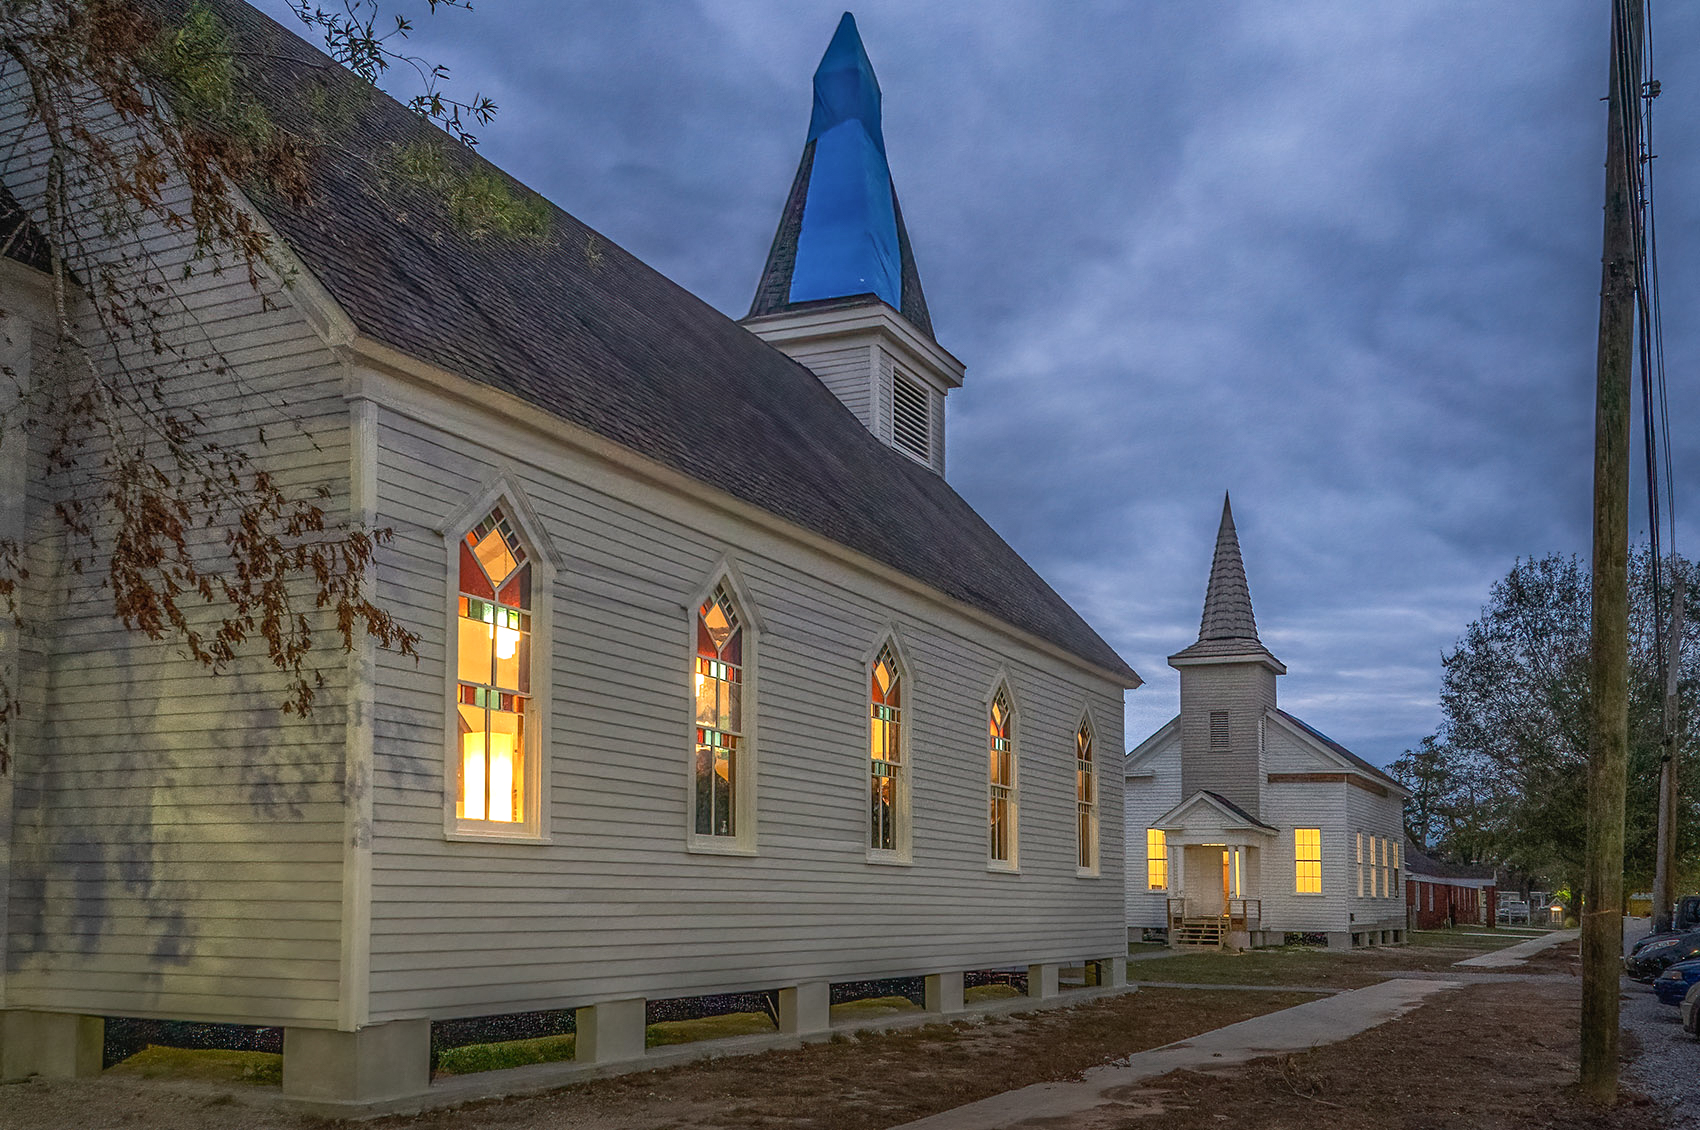 two white churches with steeples facing each other after dark lights on inside